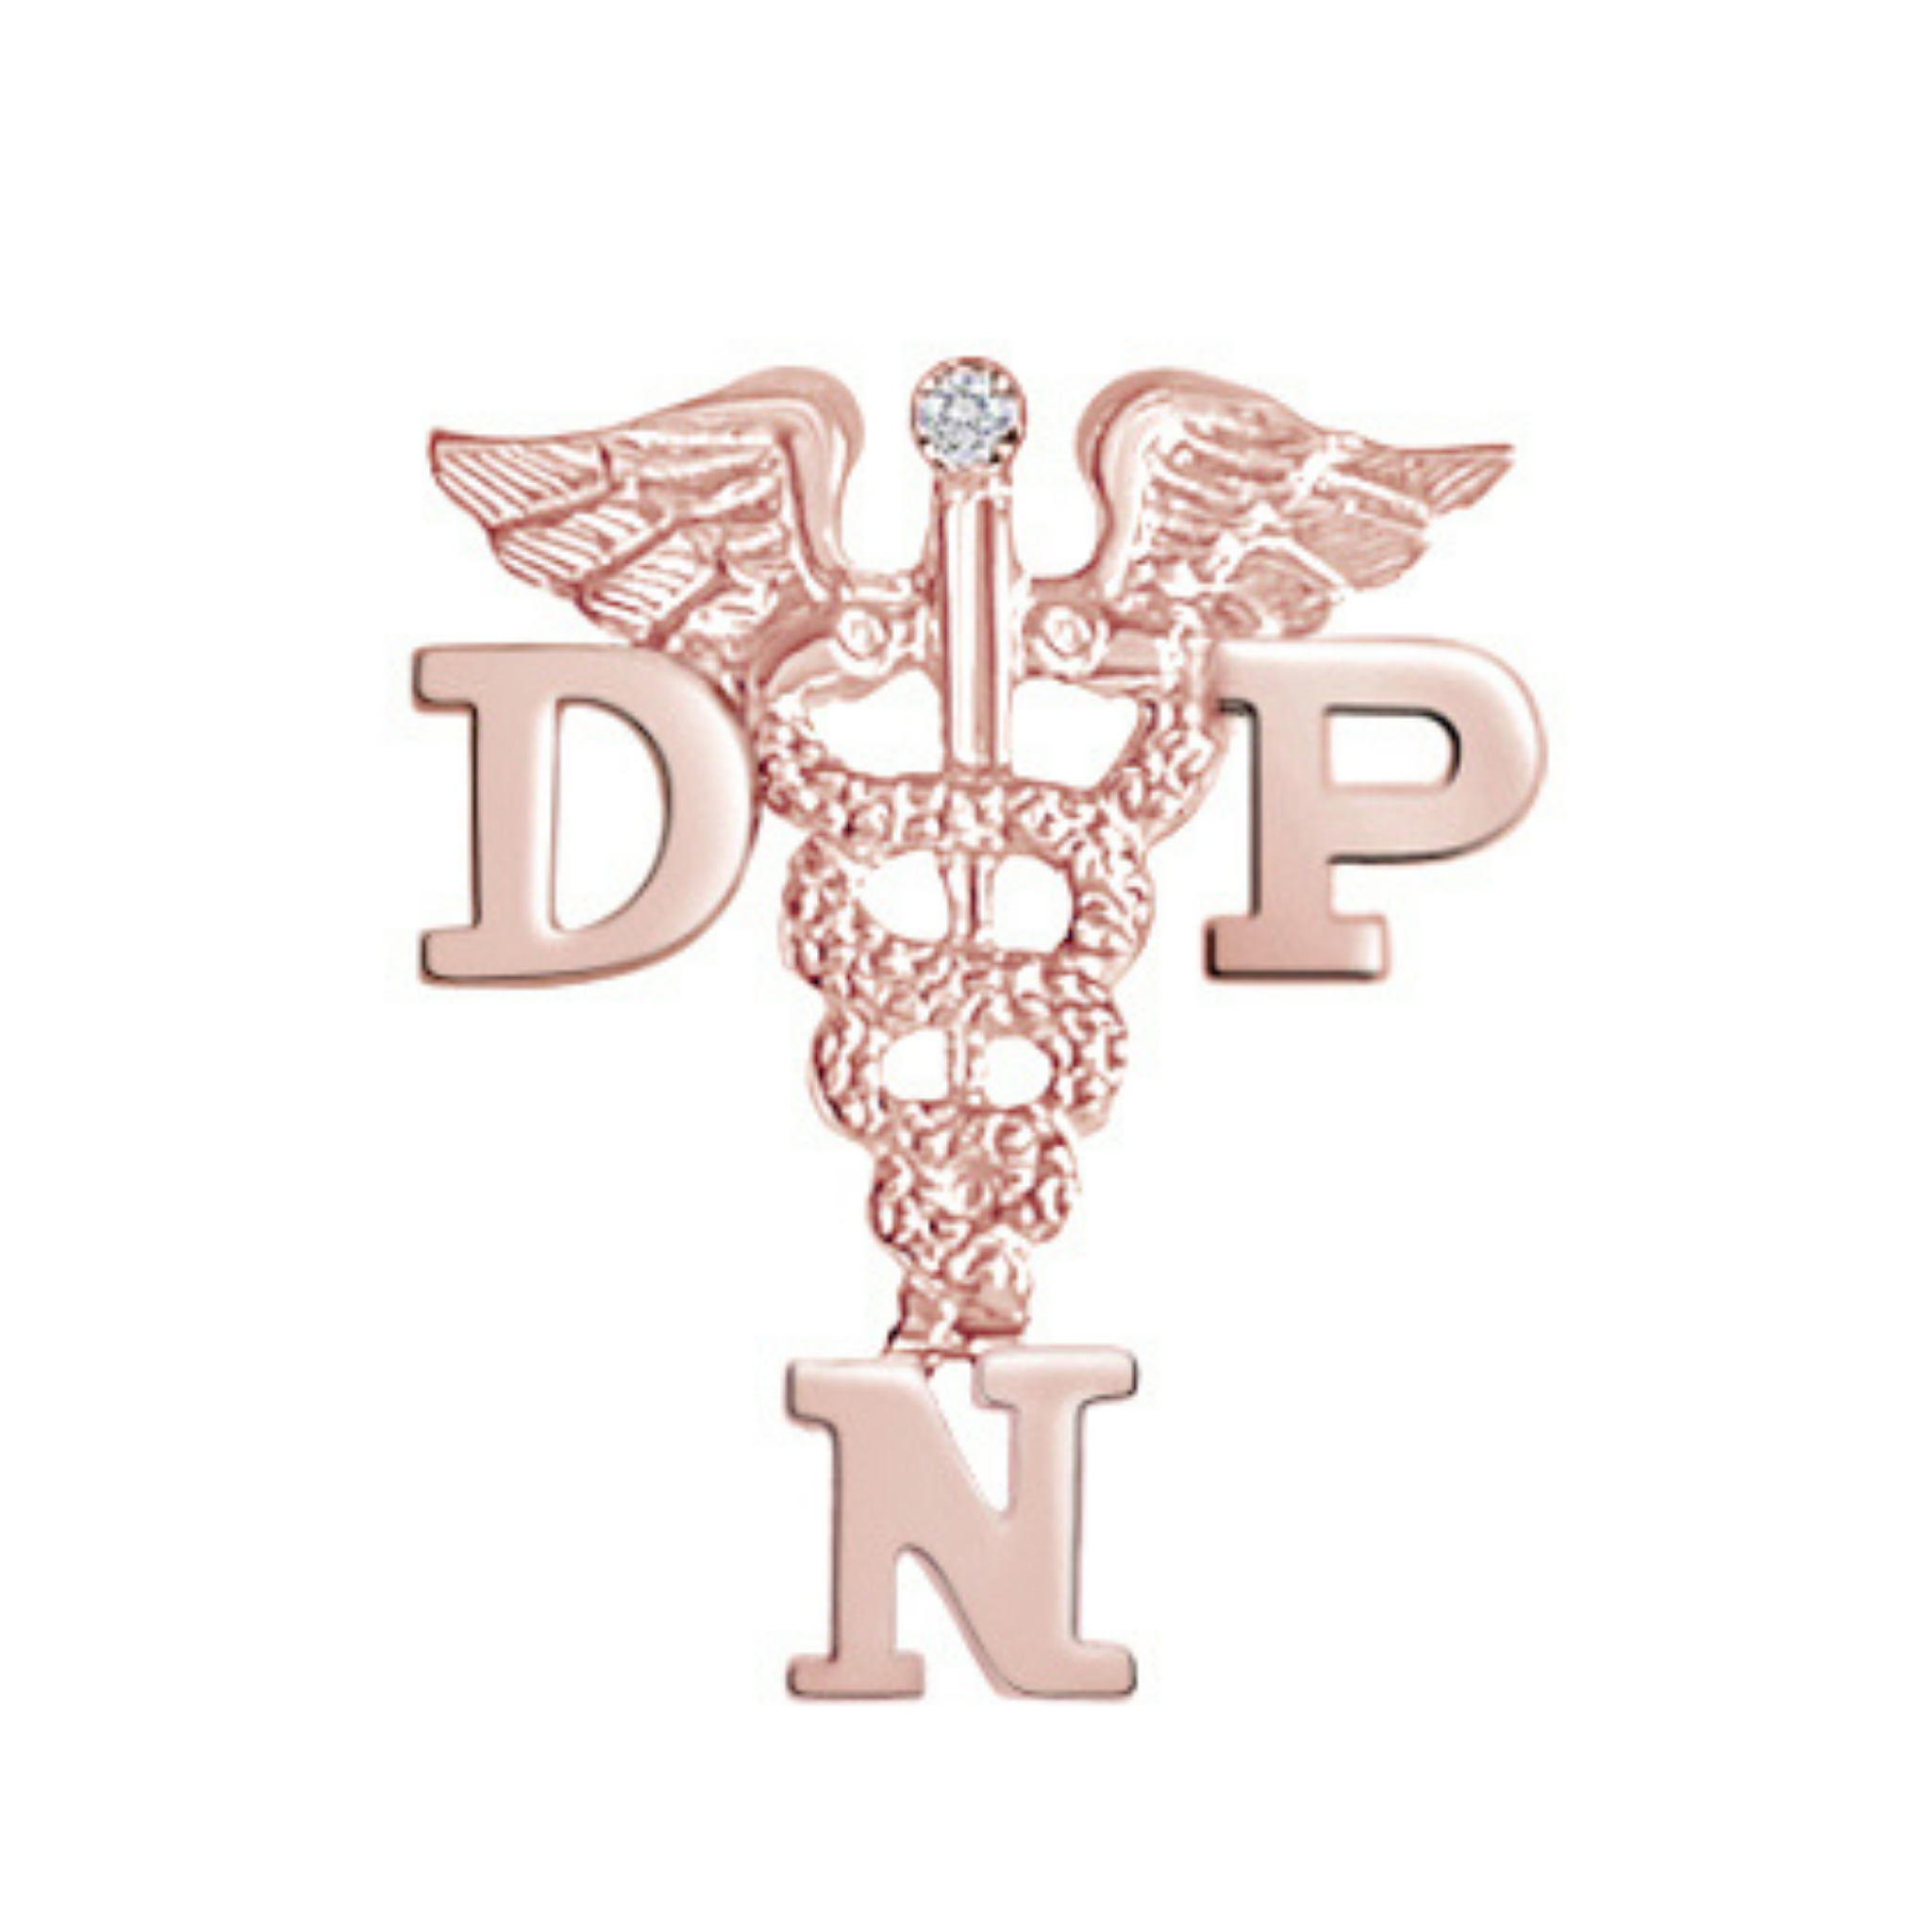 Doctor of Nursing Practice Graduation Pins, Jewelry, and Gifts when you earn your degree